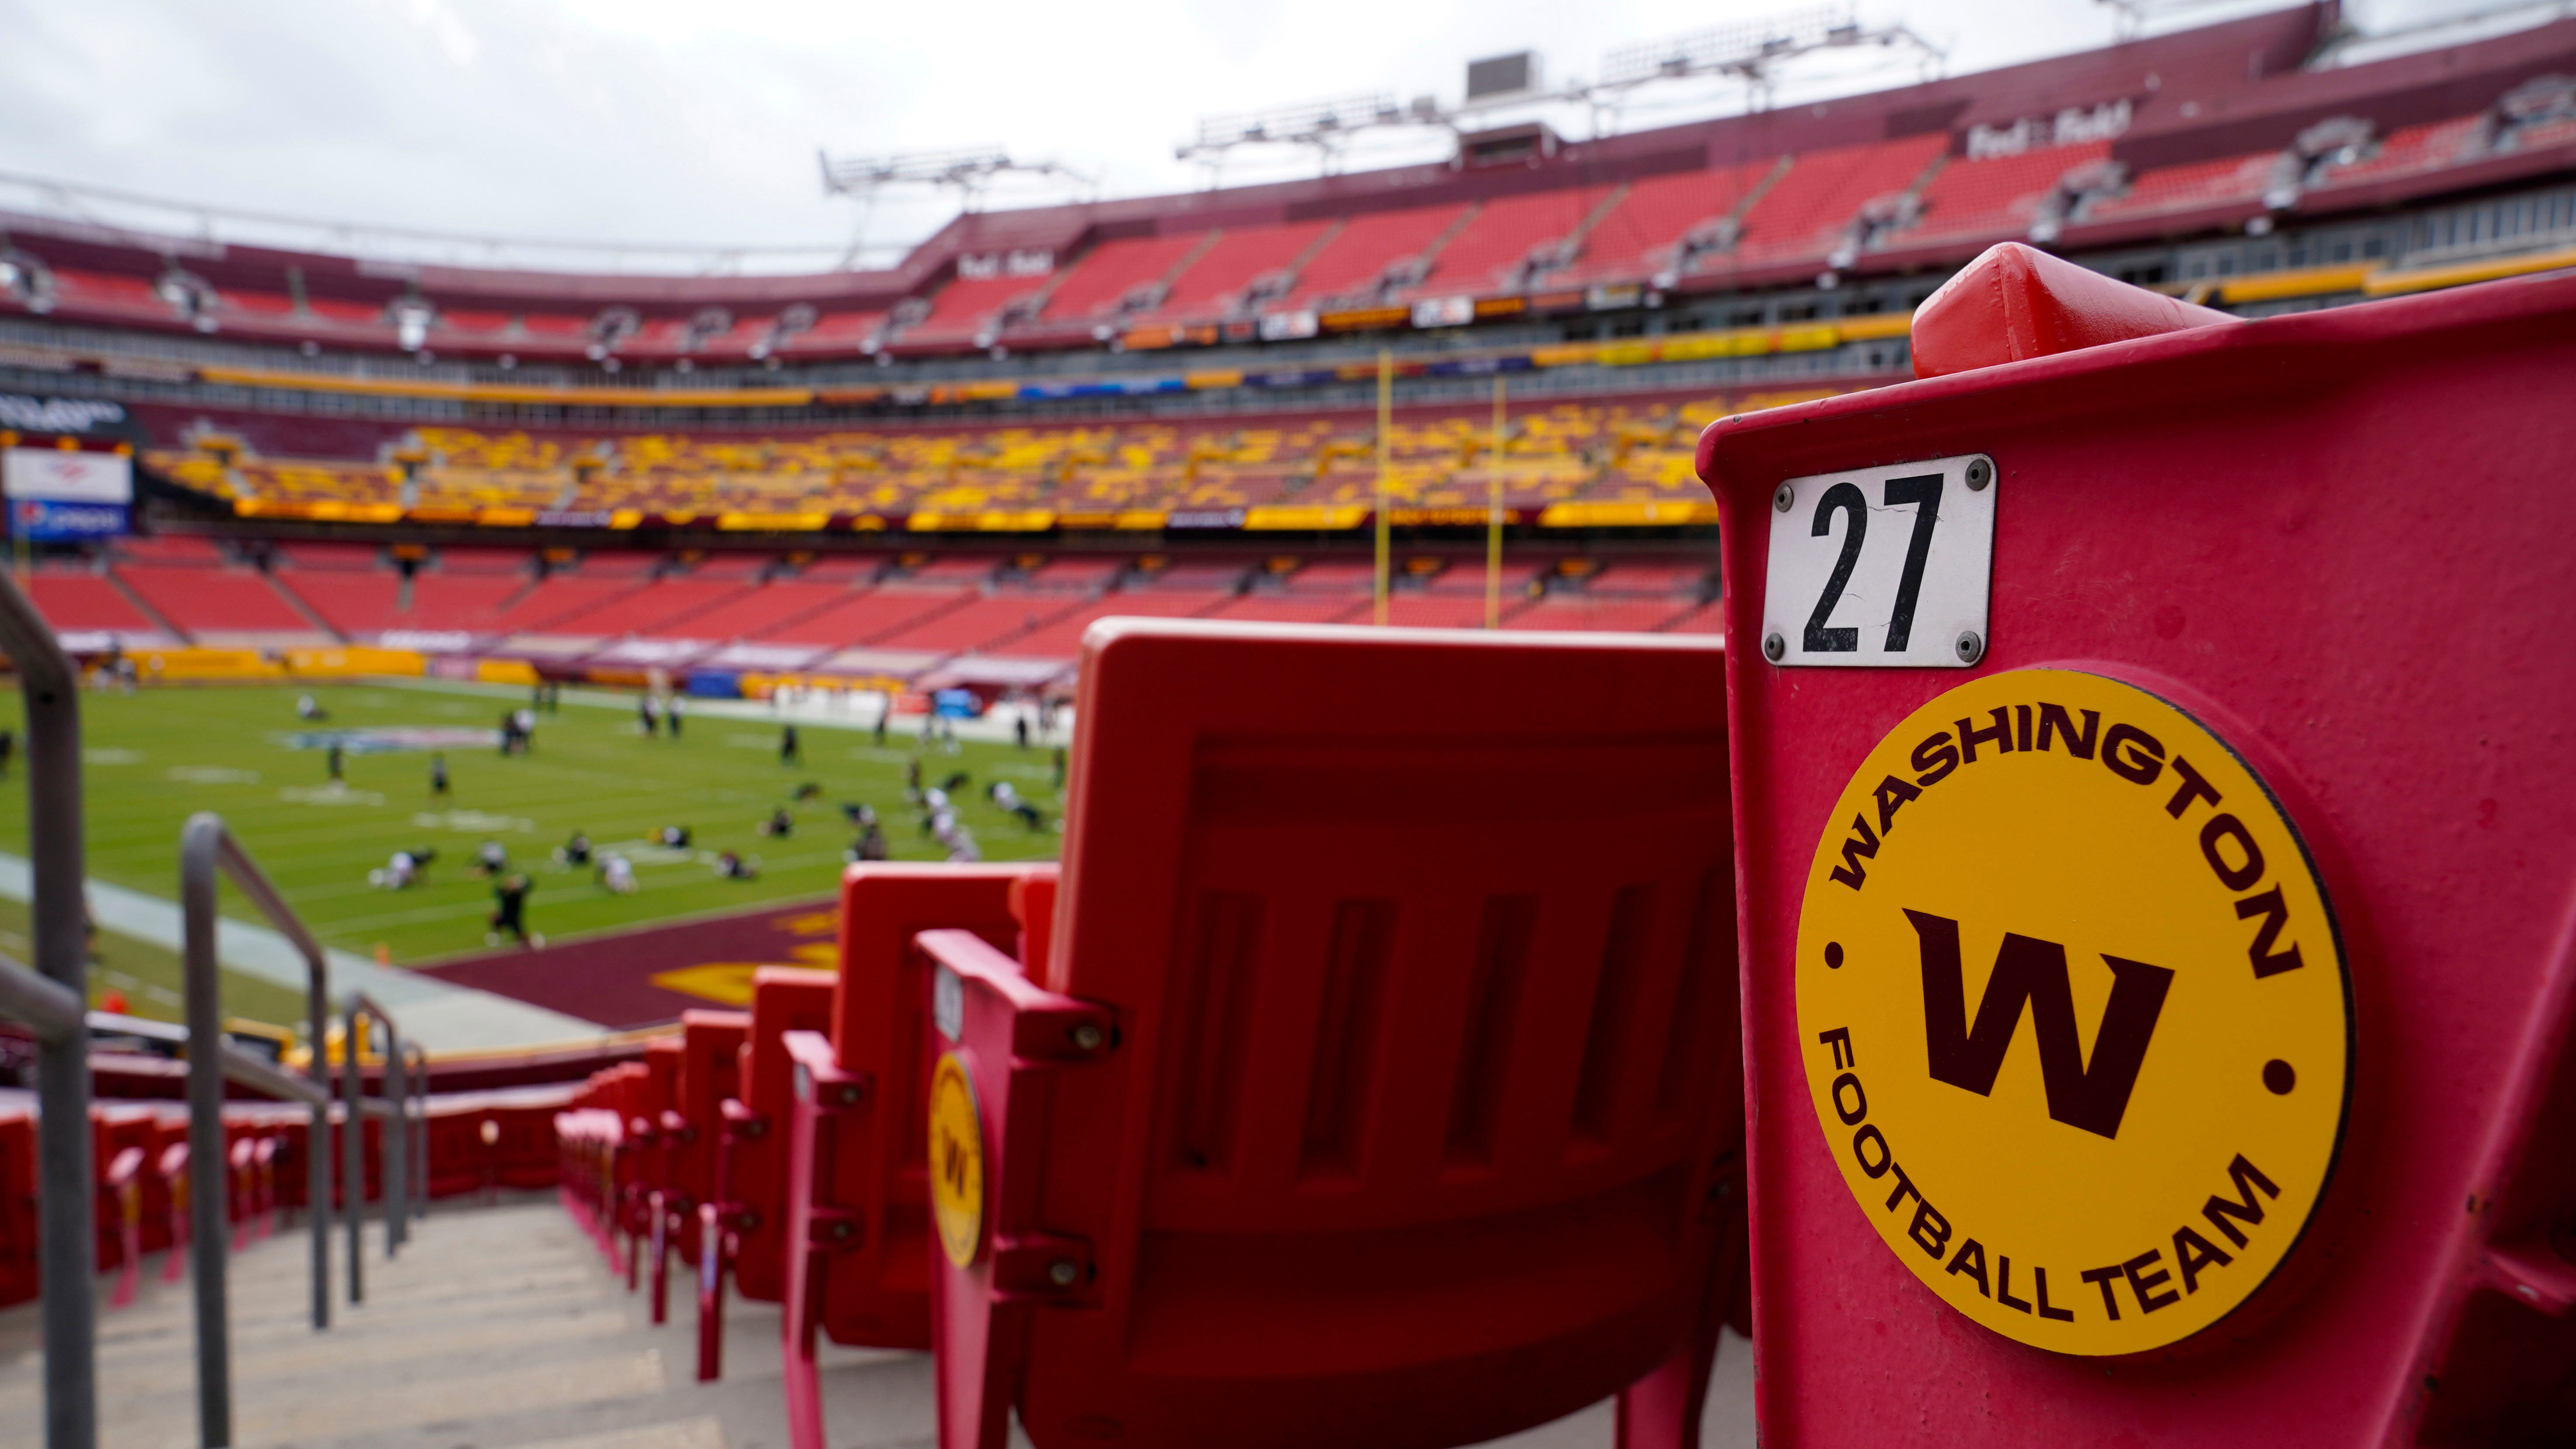 Seating at Fedex Field 